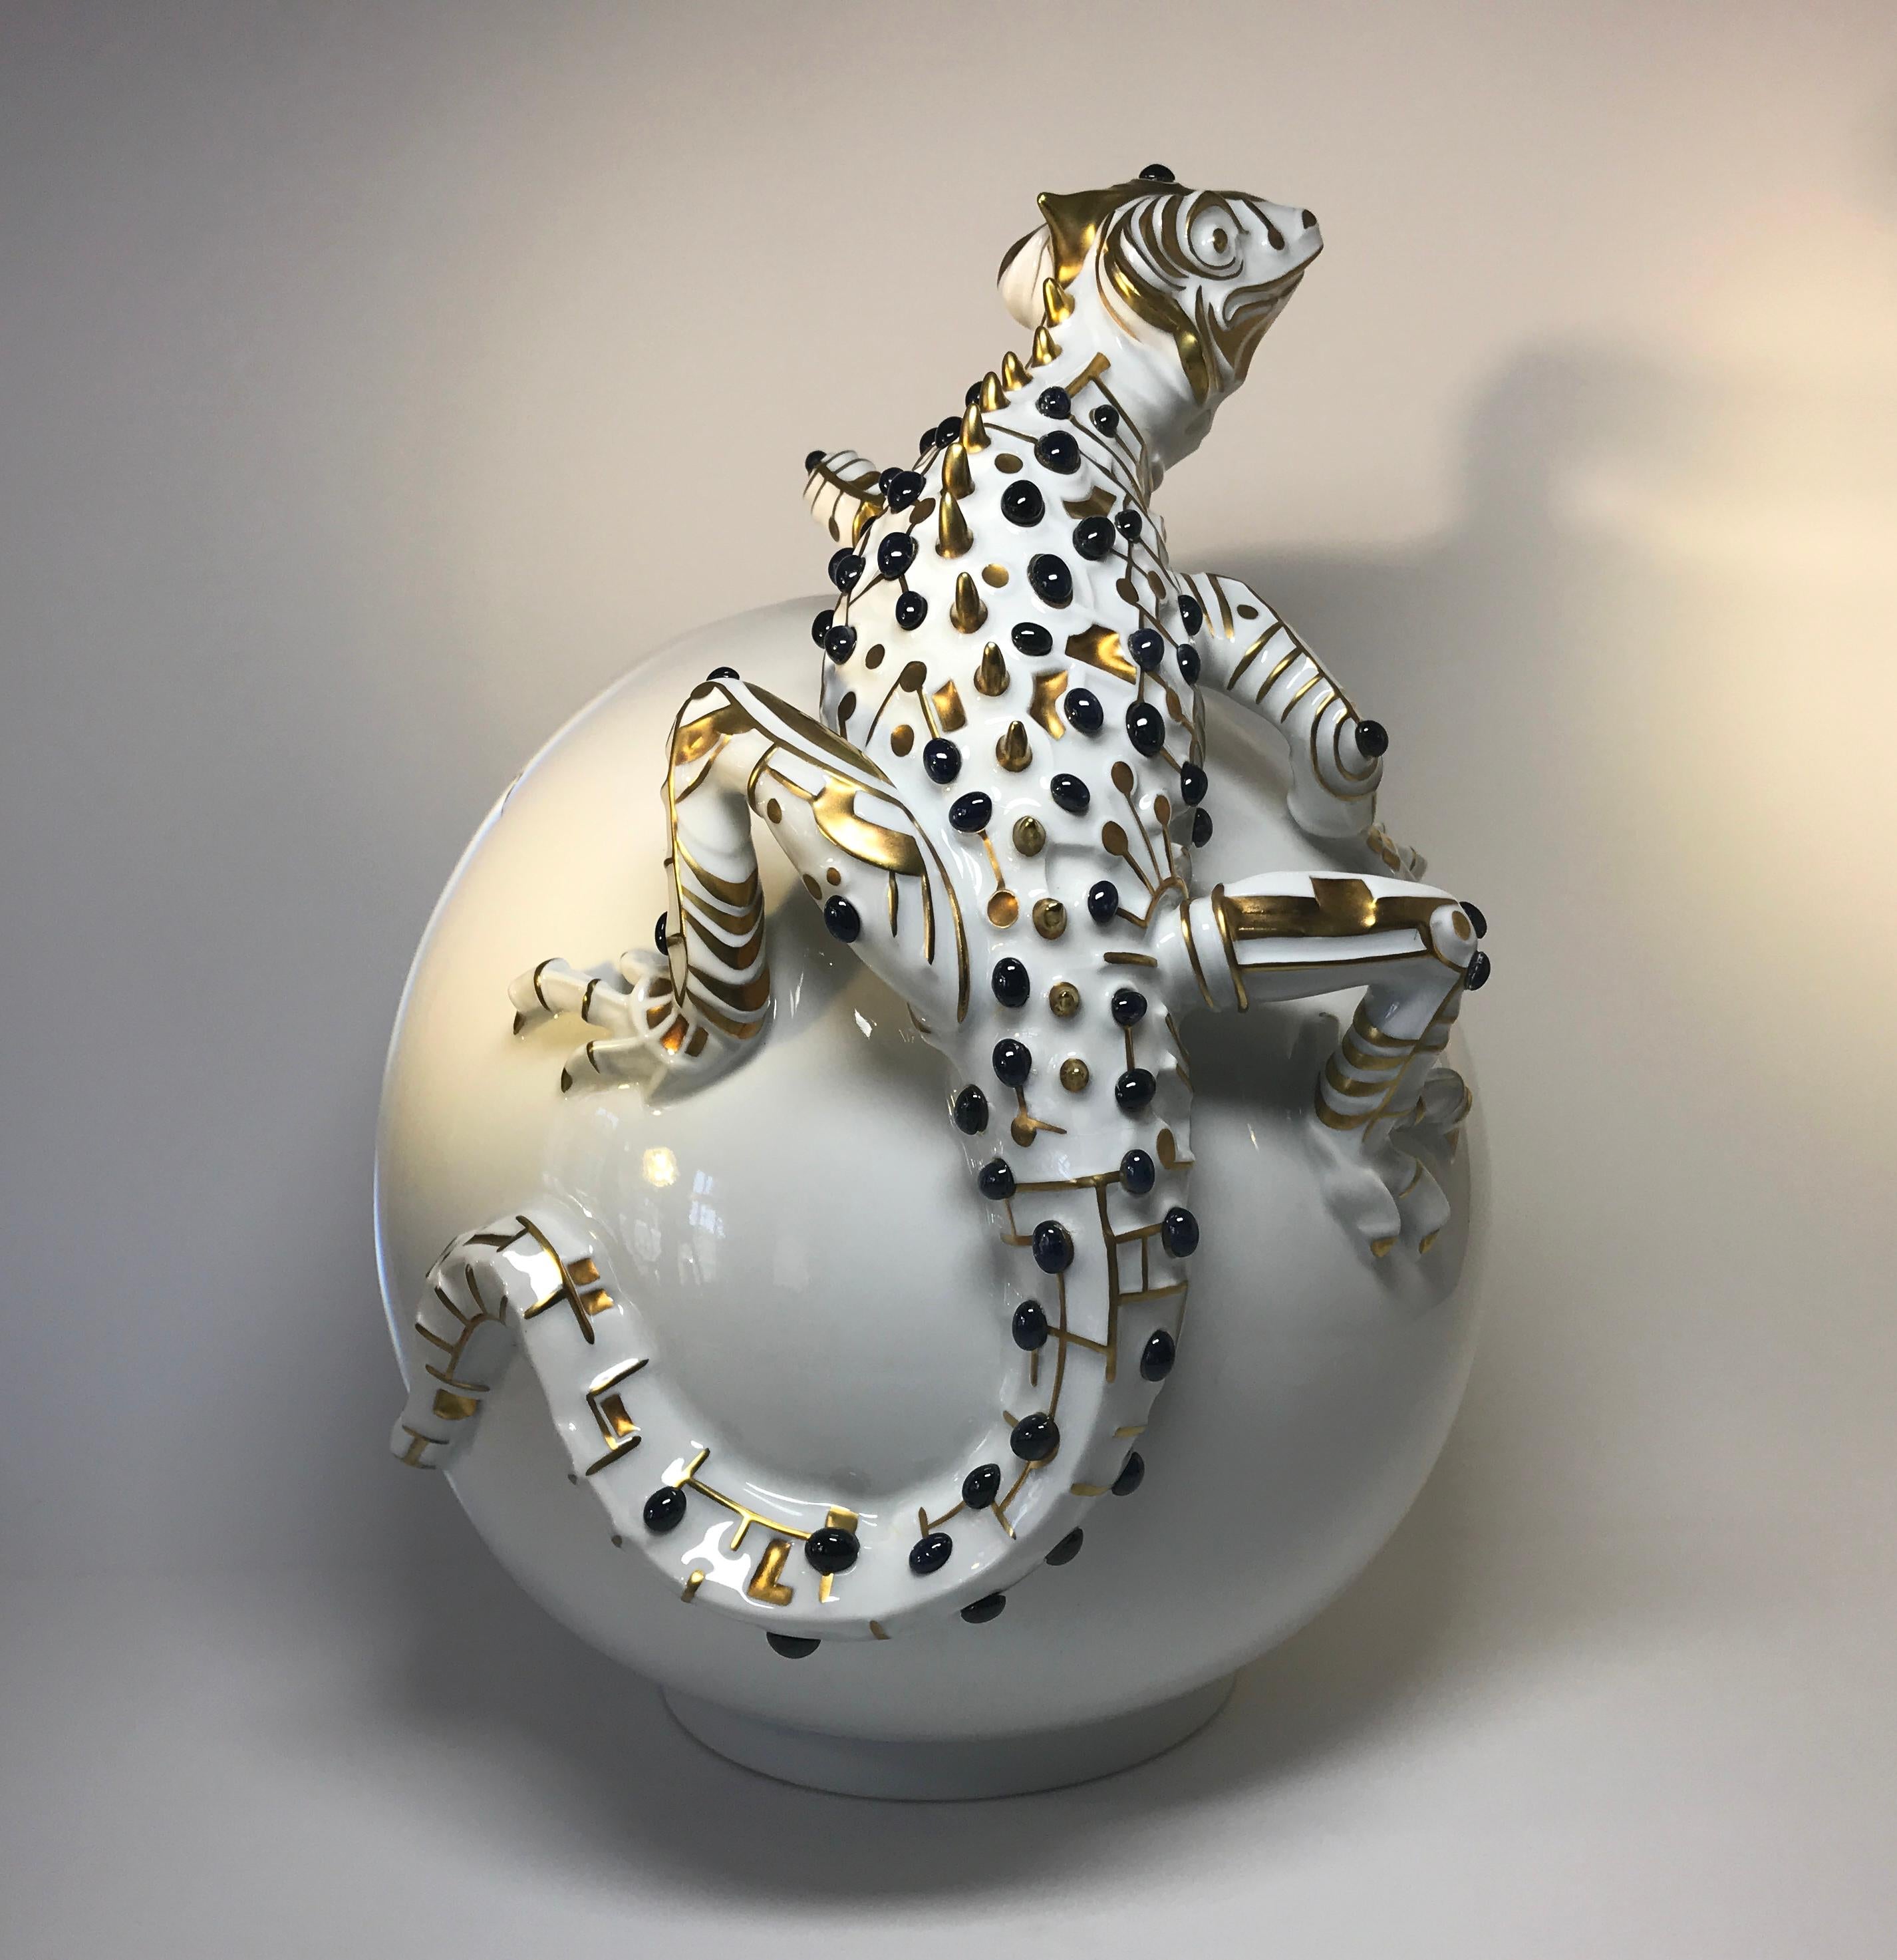 Splendid and unique 24-karat pure gold and sapphire set lizard caviar bowl
88 cabochon sapphires and 24-karat pure gold decorate this impressive lizard sculpture that sits atop a hatched white porcelain egg
Designed and created by Jiri Lastovicka